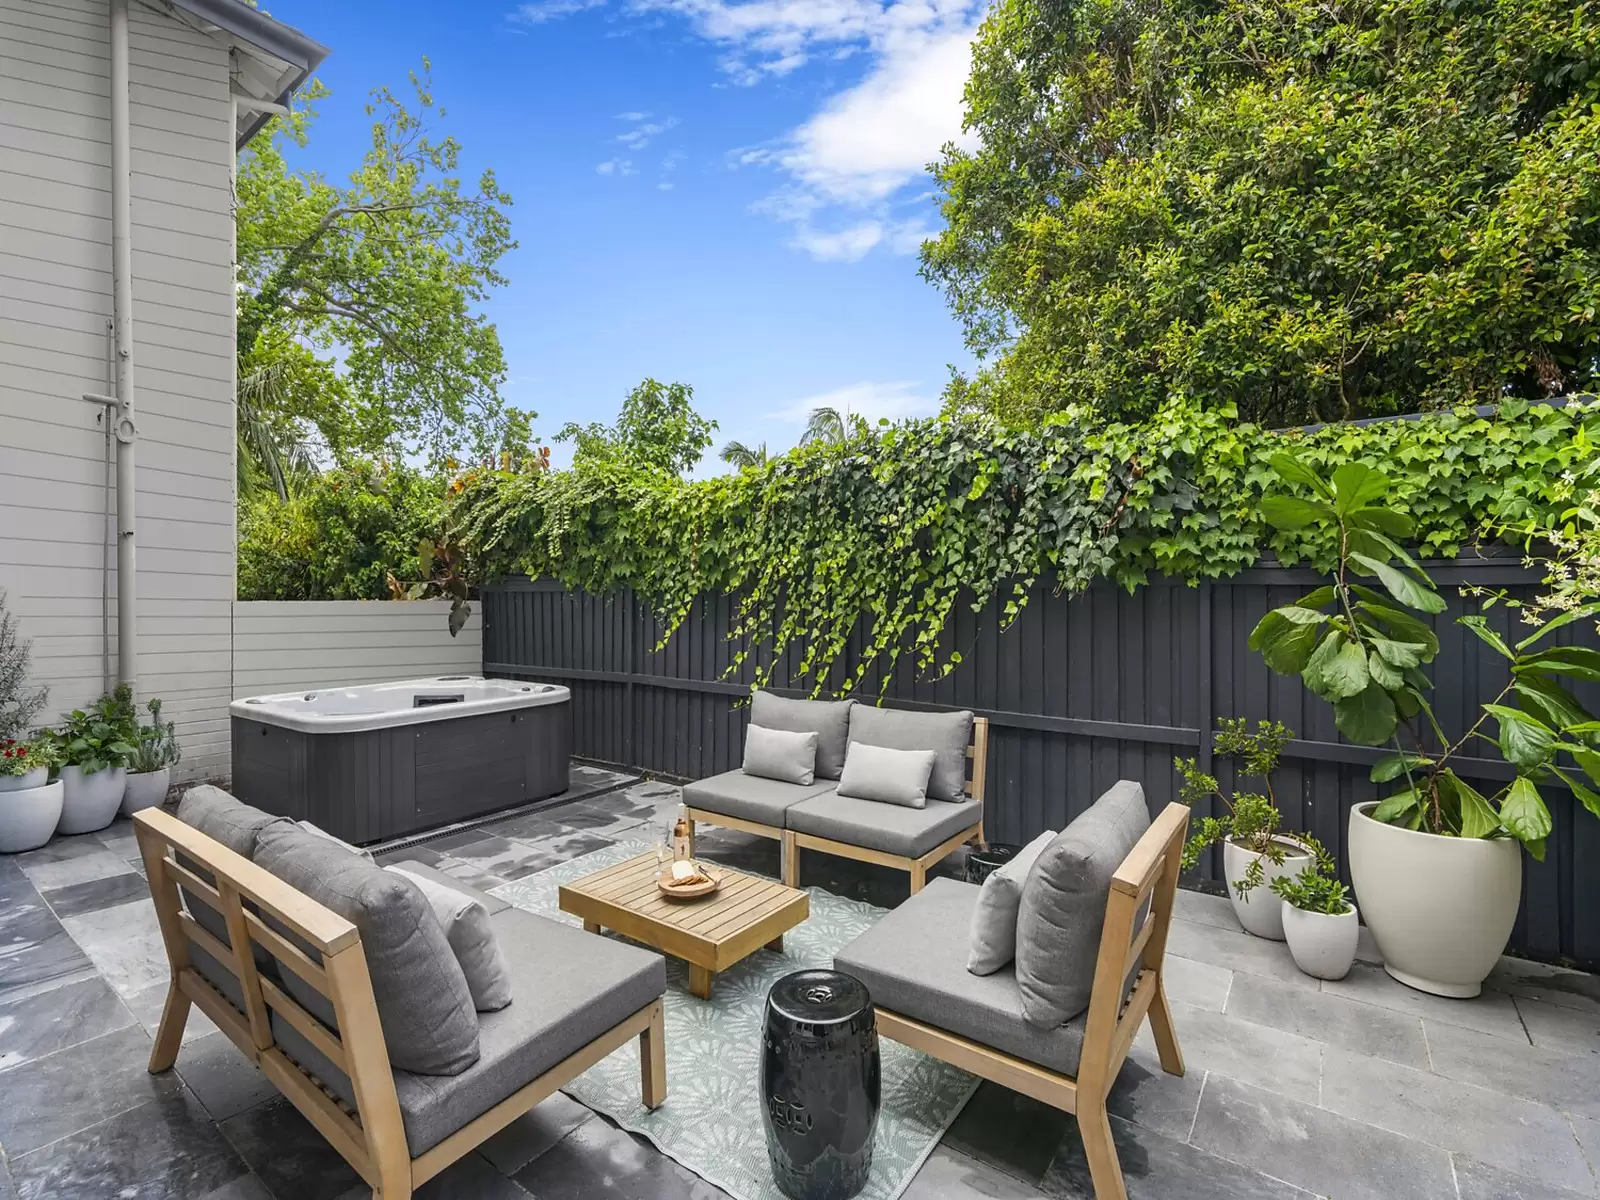 Photo #6: Townhouse 2/9-11 Rosemont Avenue, Woollahra - Sold by Sydney Sotheby's International Realty